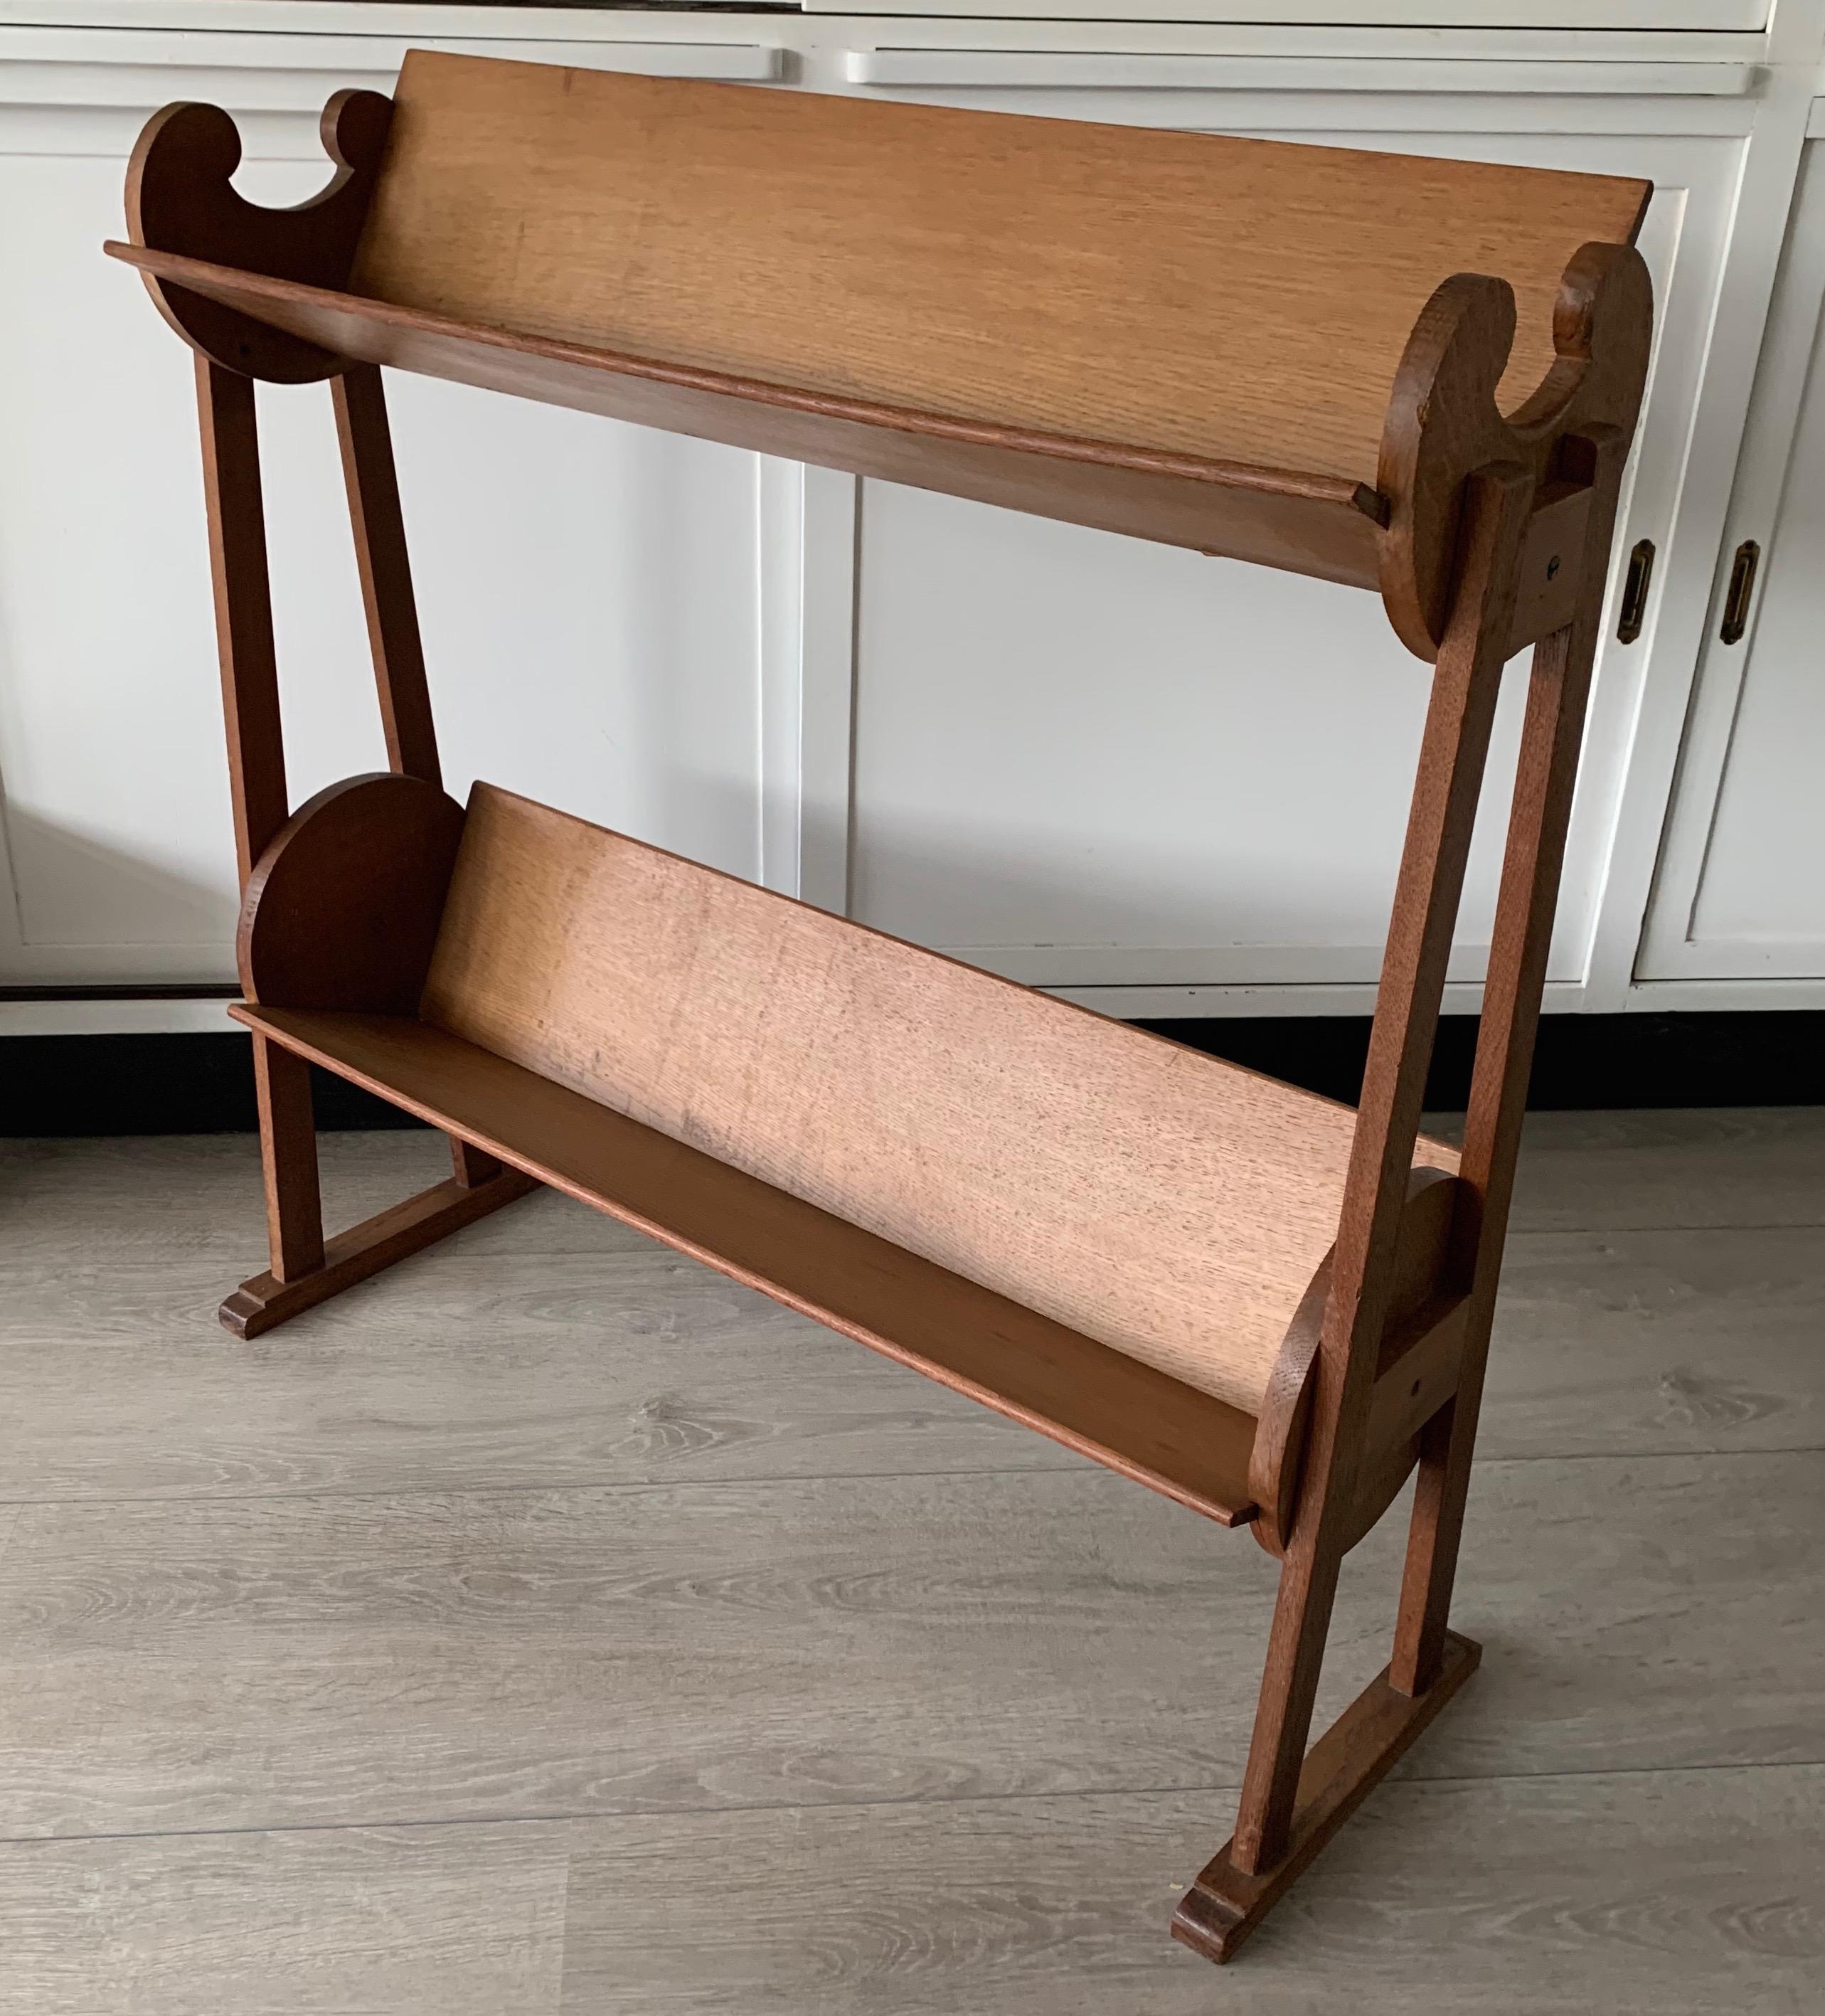 Stylish and practical antique, solid oak book stand.

This rare, two-tier bookcase could be the perfect finish to a small area for reading, rest and relaxation. However, this timeless design could also be used in an office setting for quick and